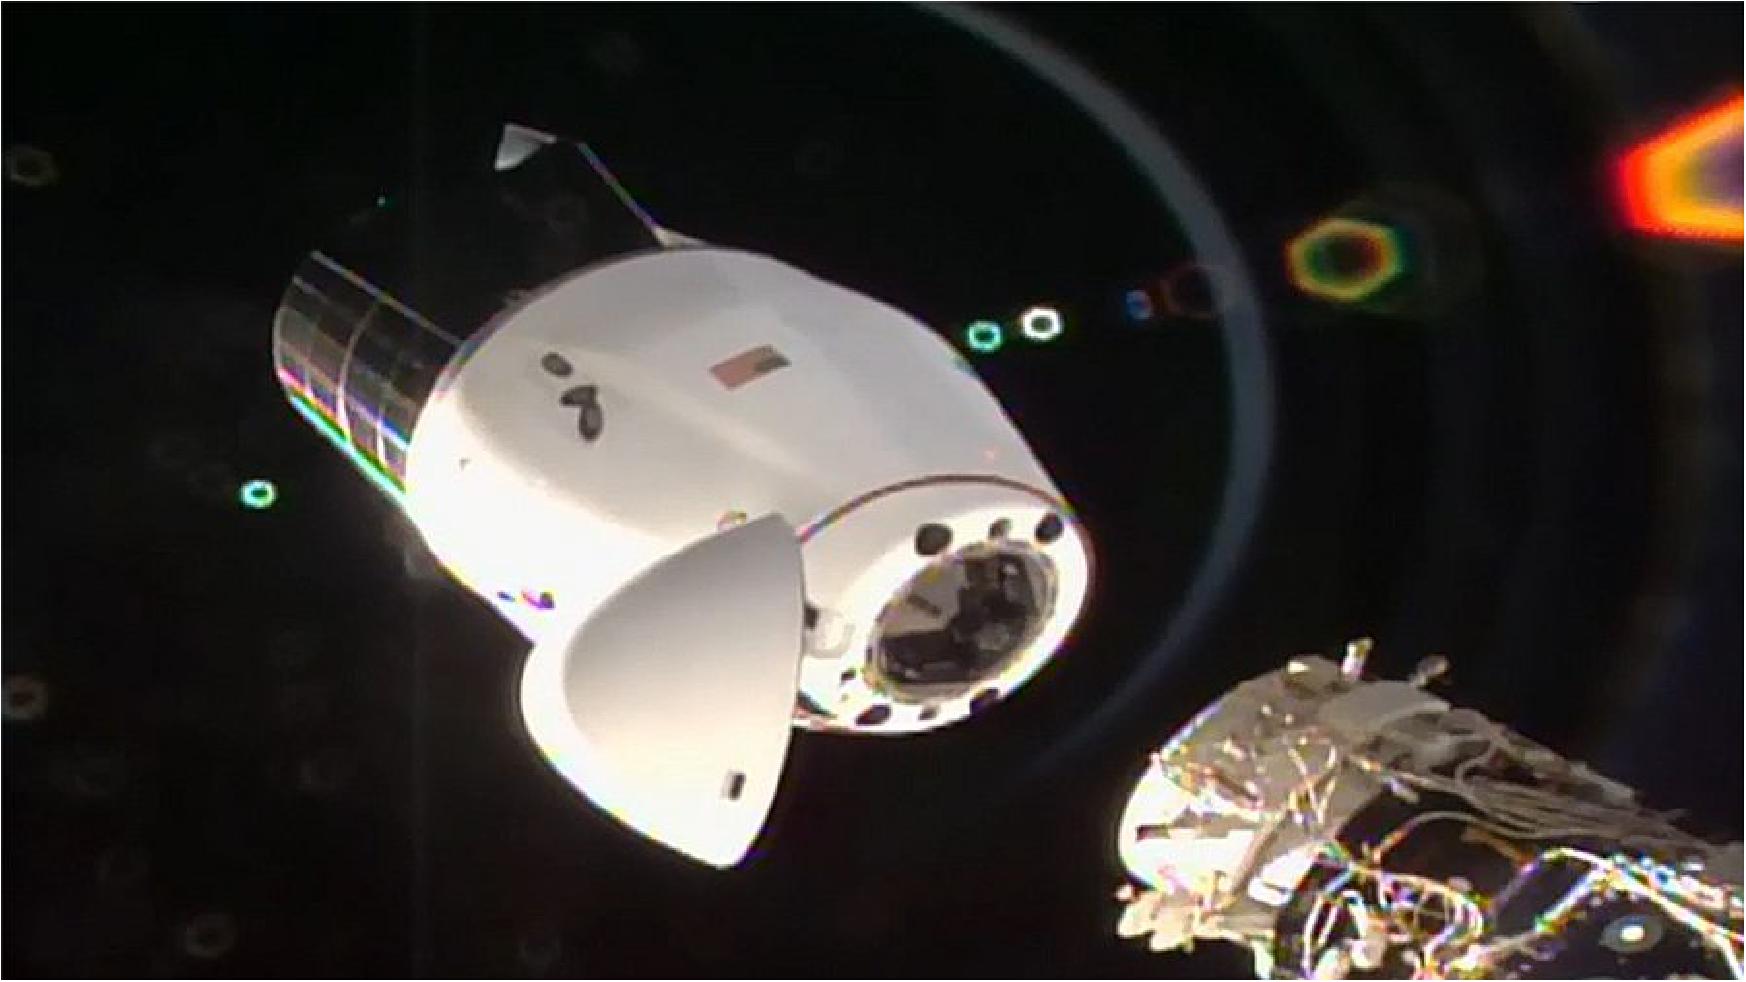 Figure 10: The SpaceX Cargo Dragon vehicle begins its separation from the station after undocking from the Harmony module’s international docking adapter (image credit: NASA TV)